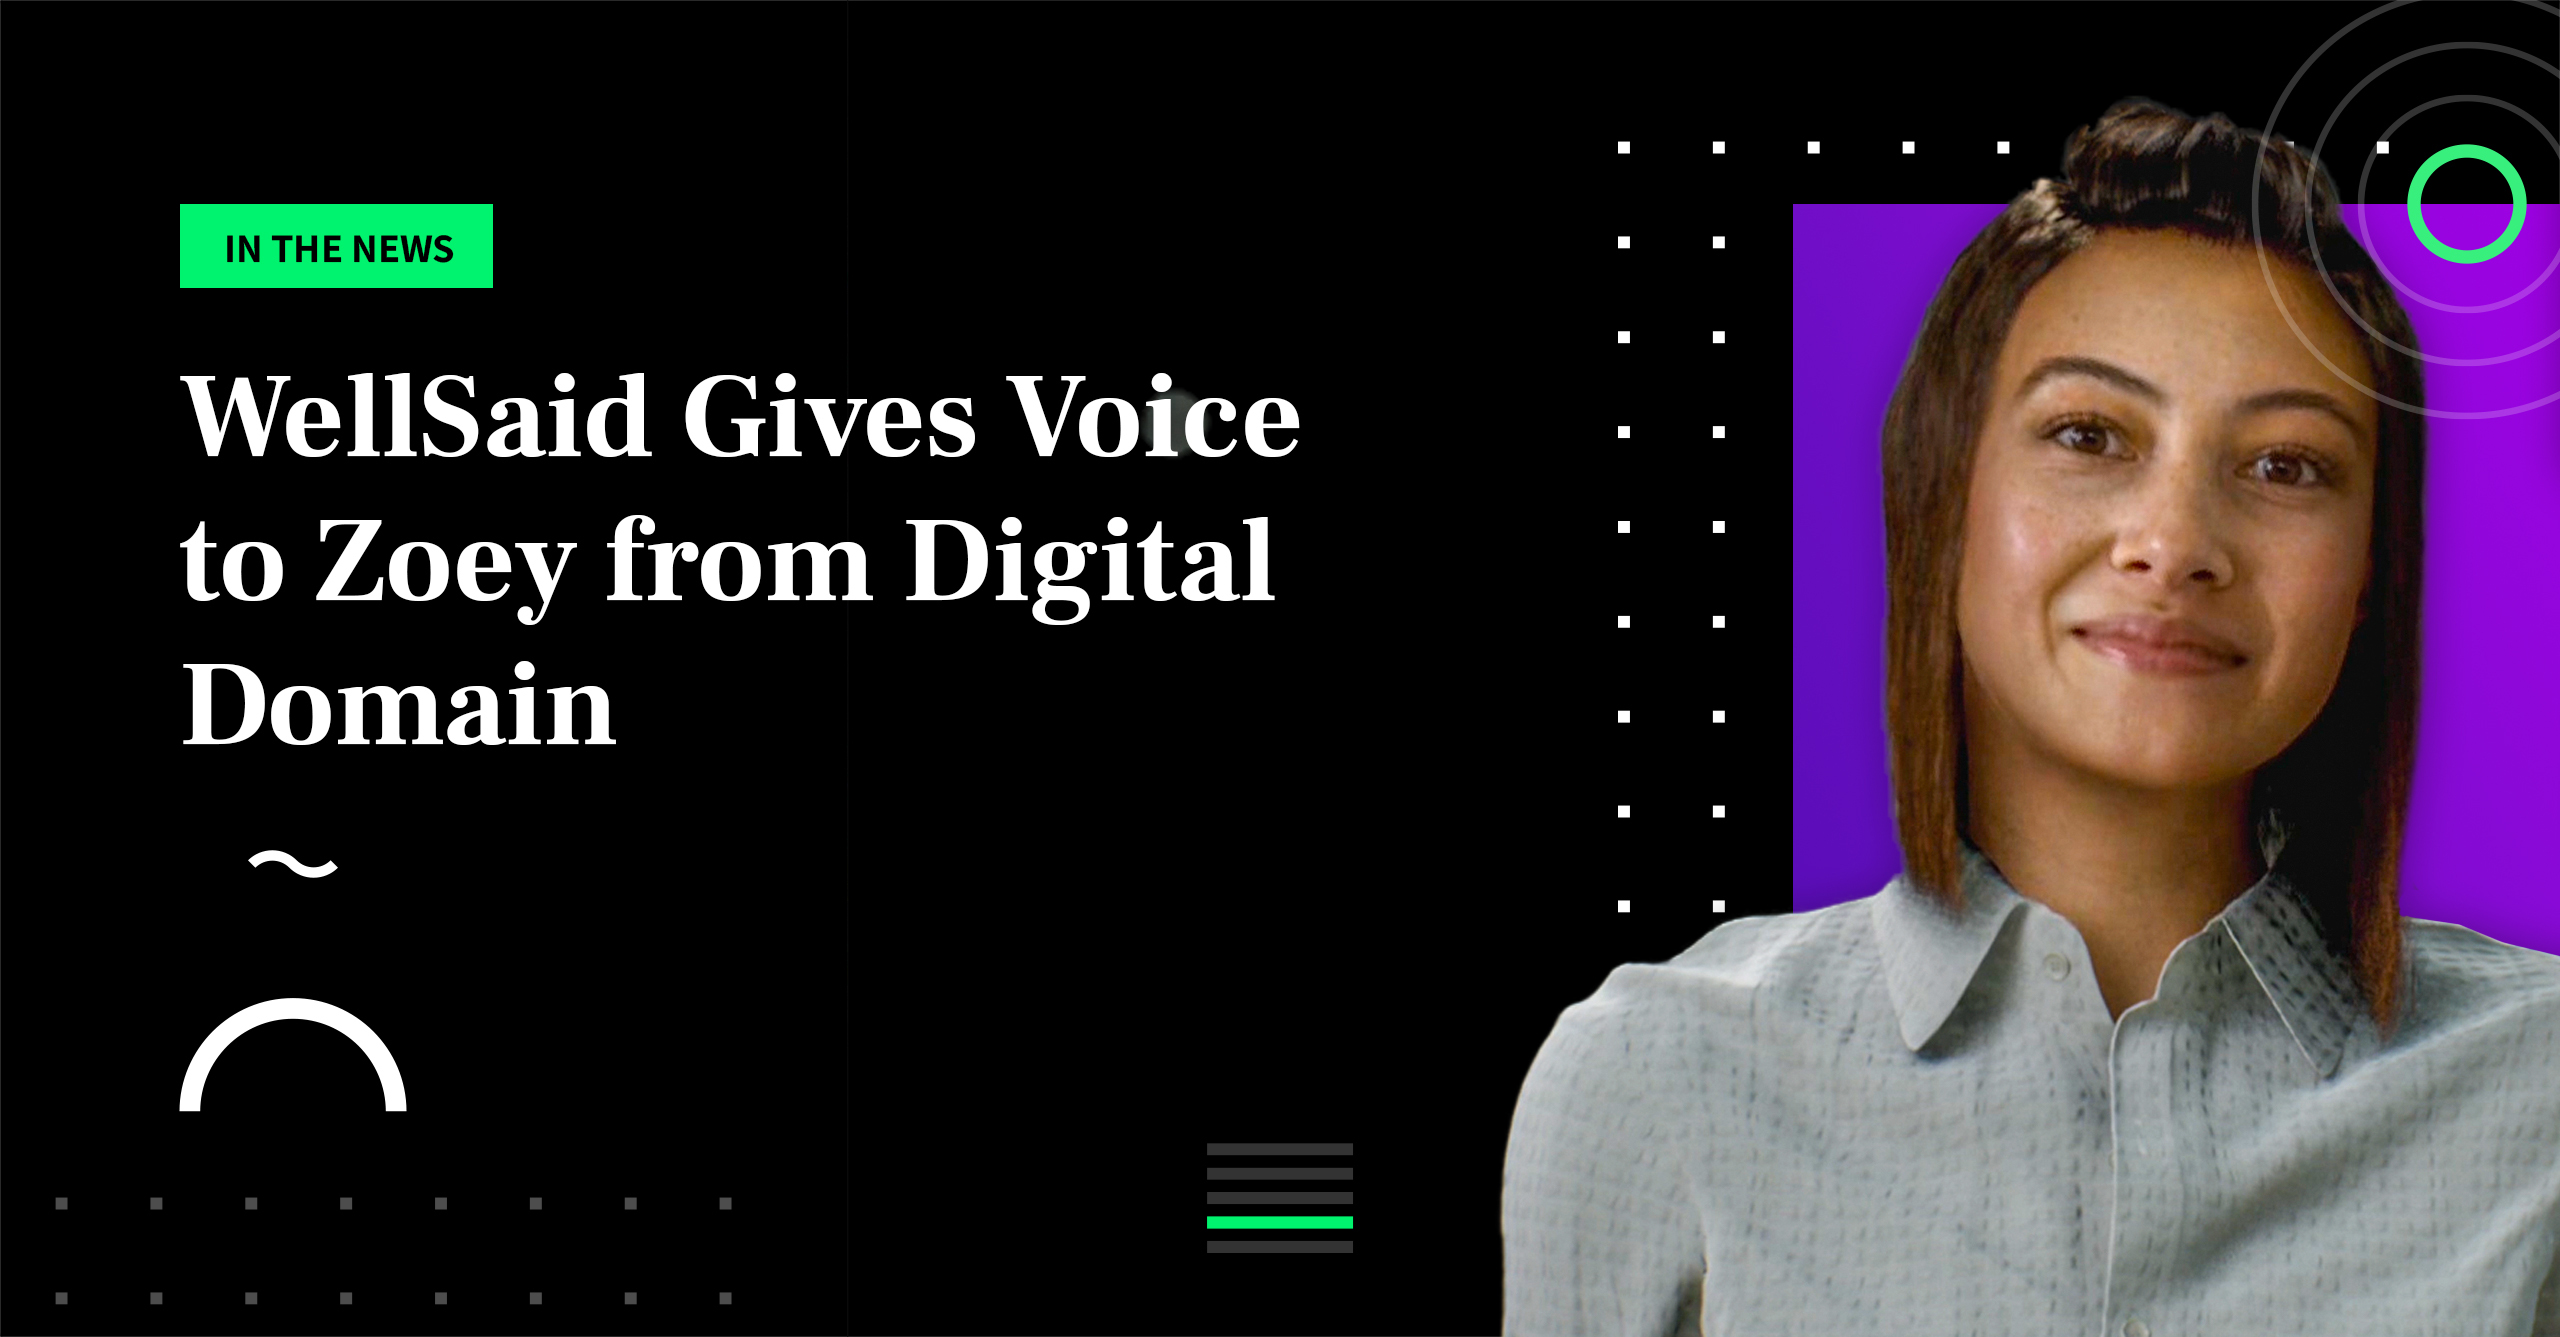 Digital Domain uses WellSaid Labs voice avatar to give voice to video avatar, Zoey